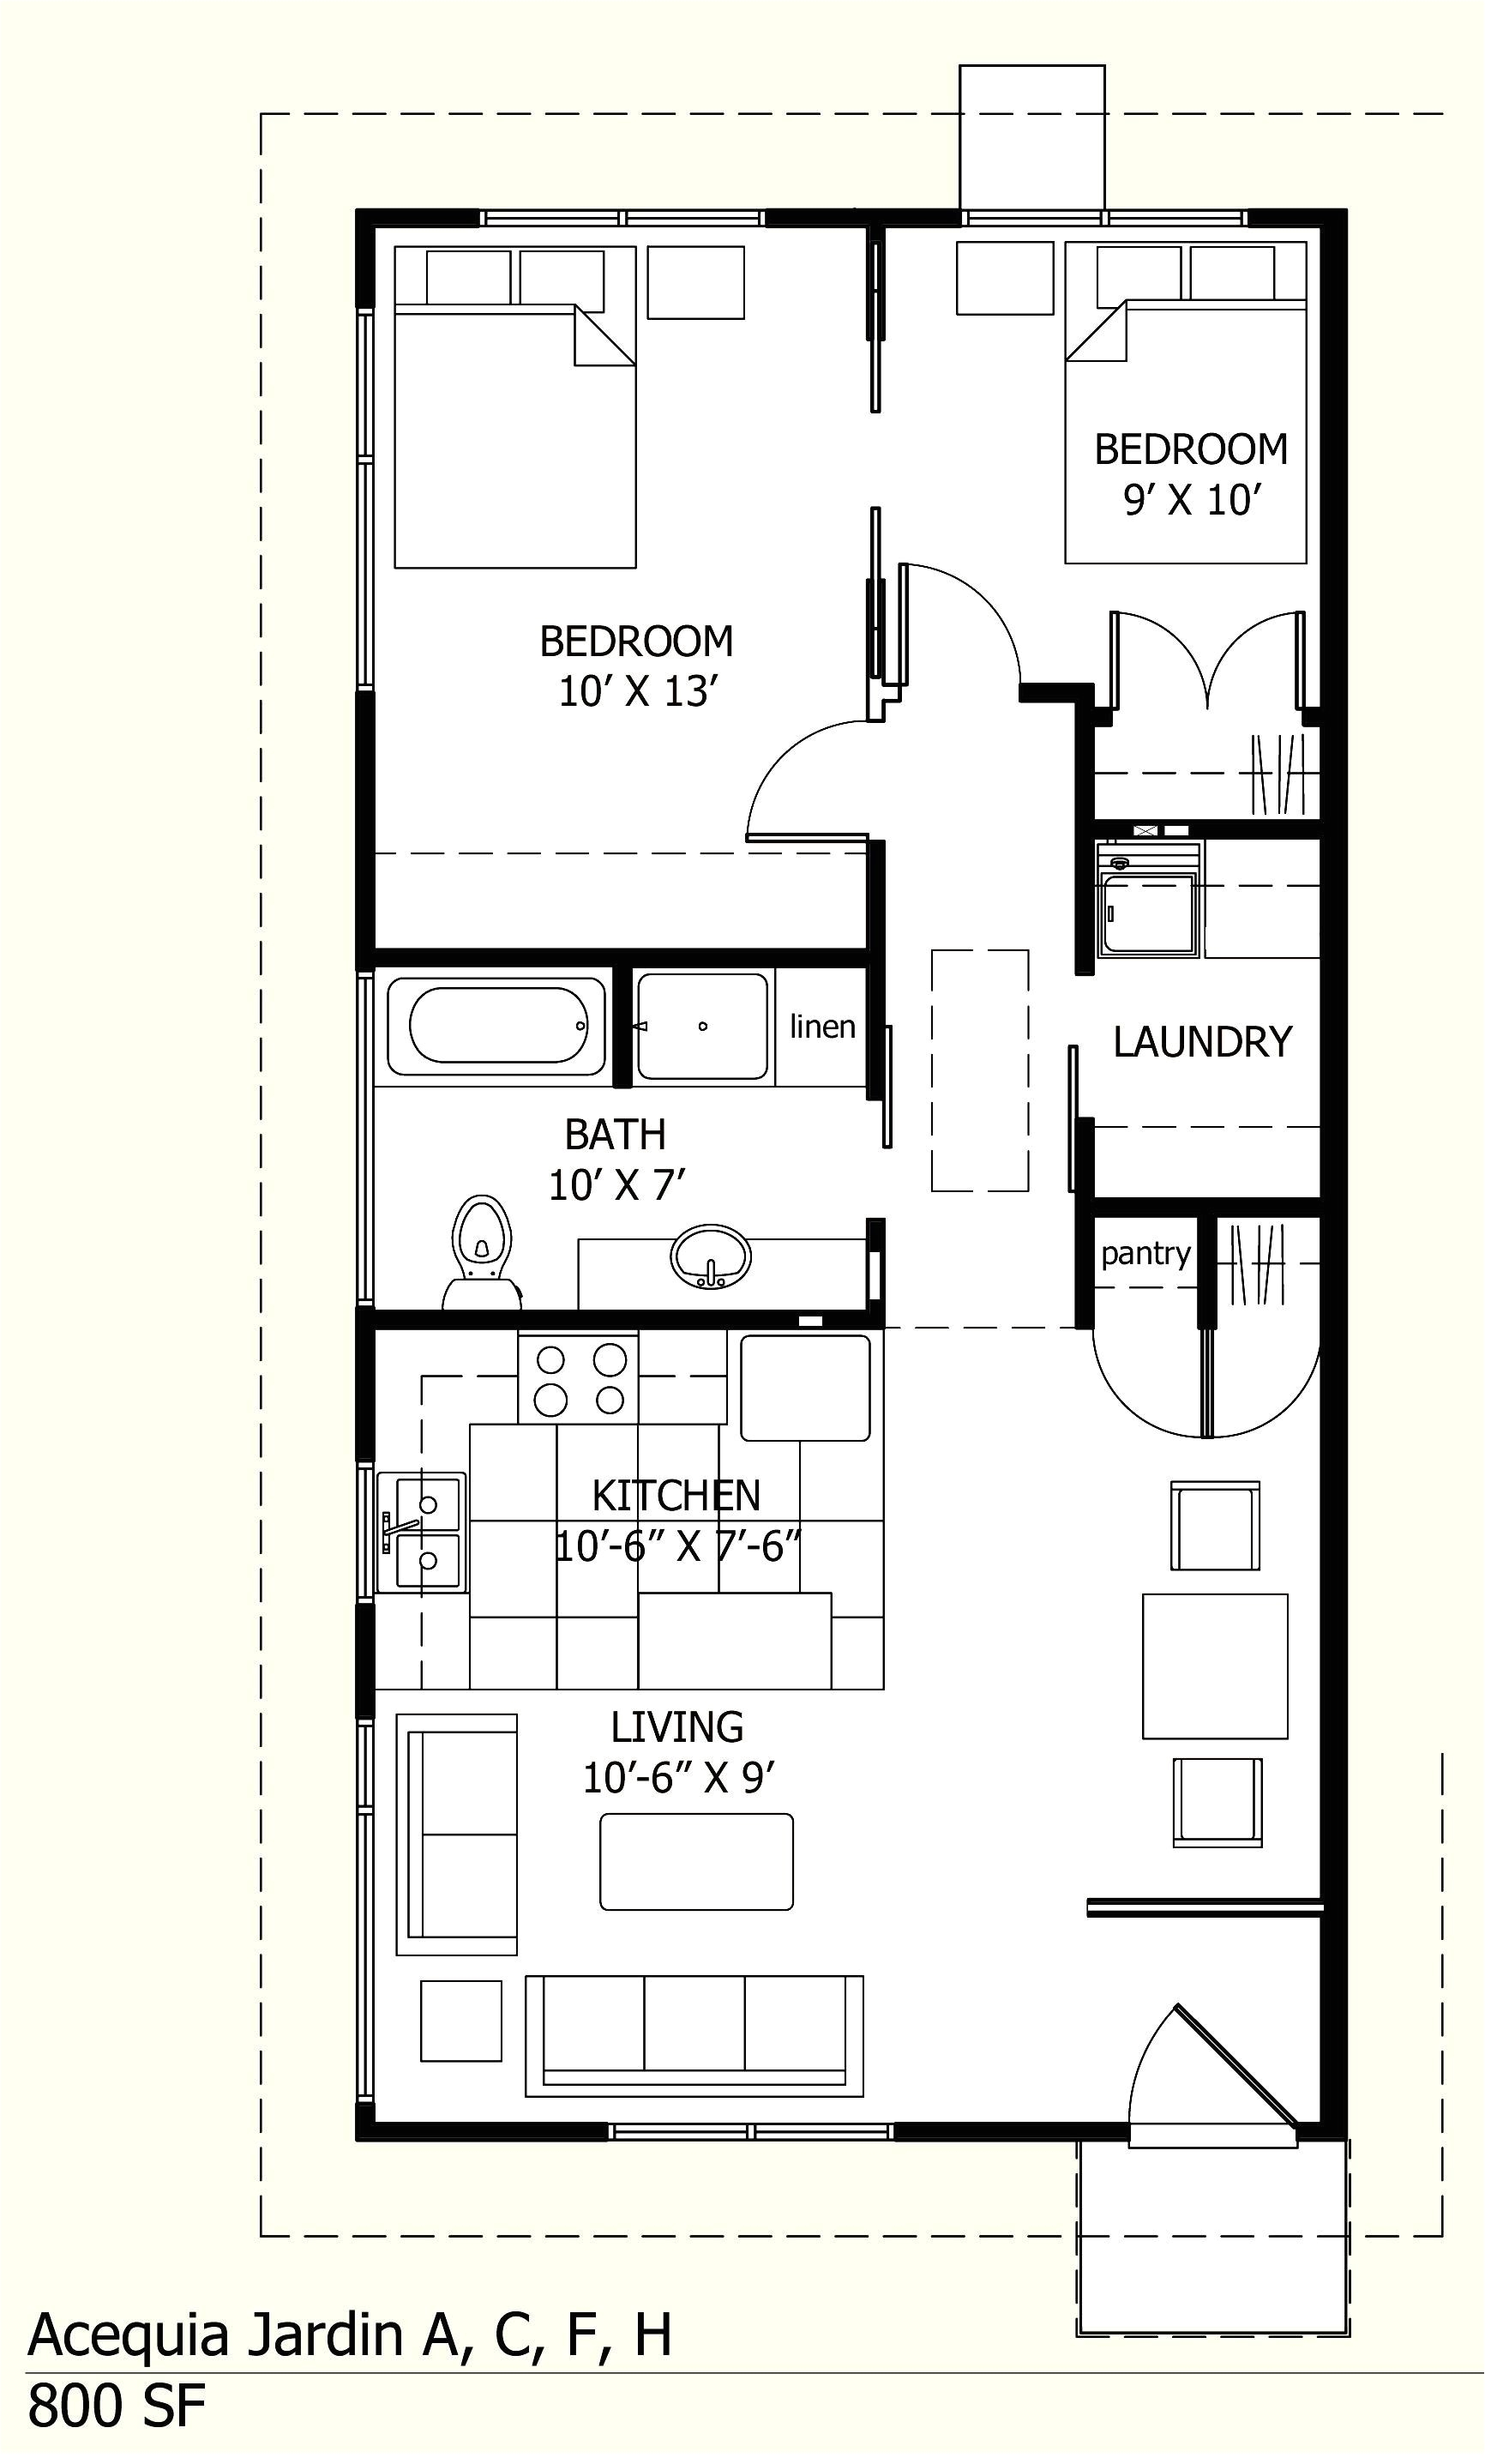 small house plans under 600 sq ft stephniepalma 600 sf house plans luxury 2 bedroom apartment